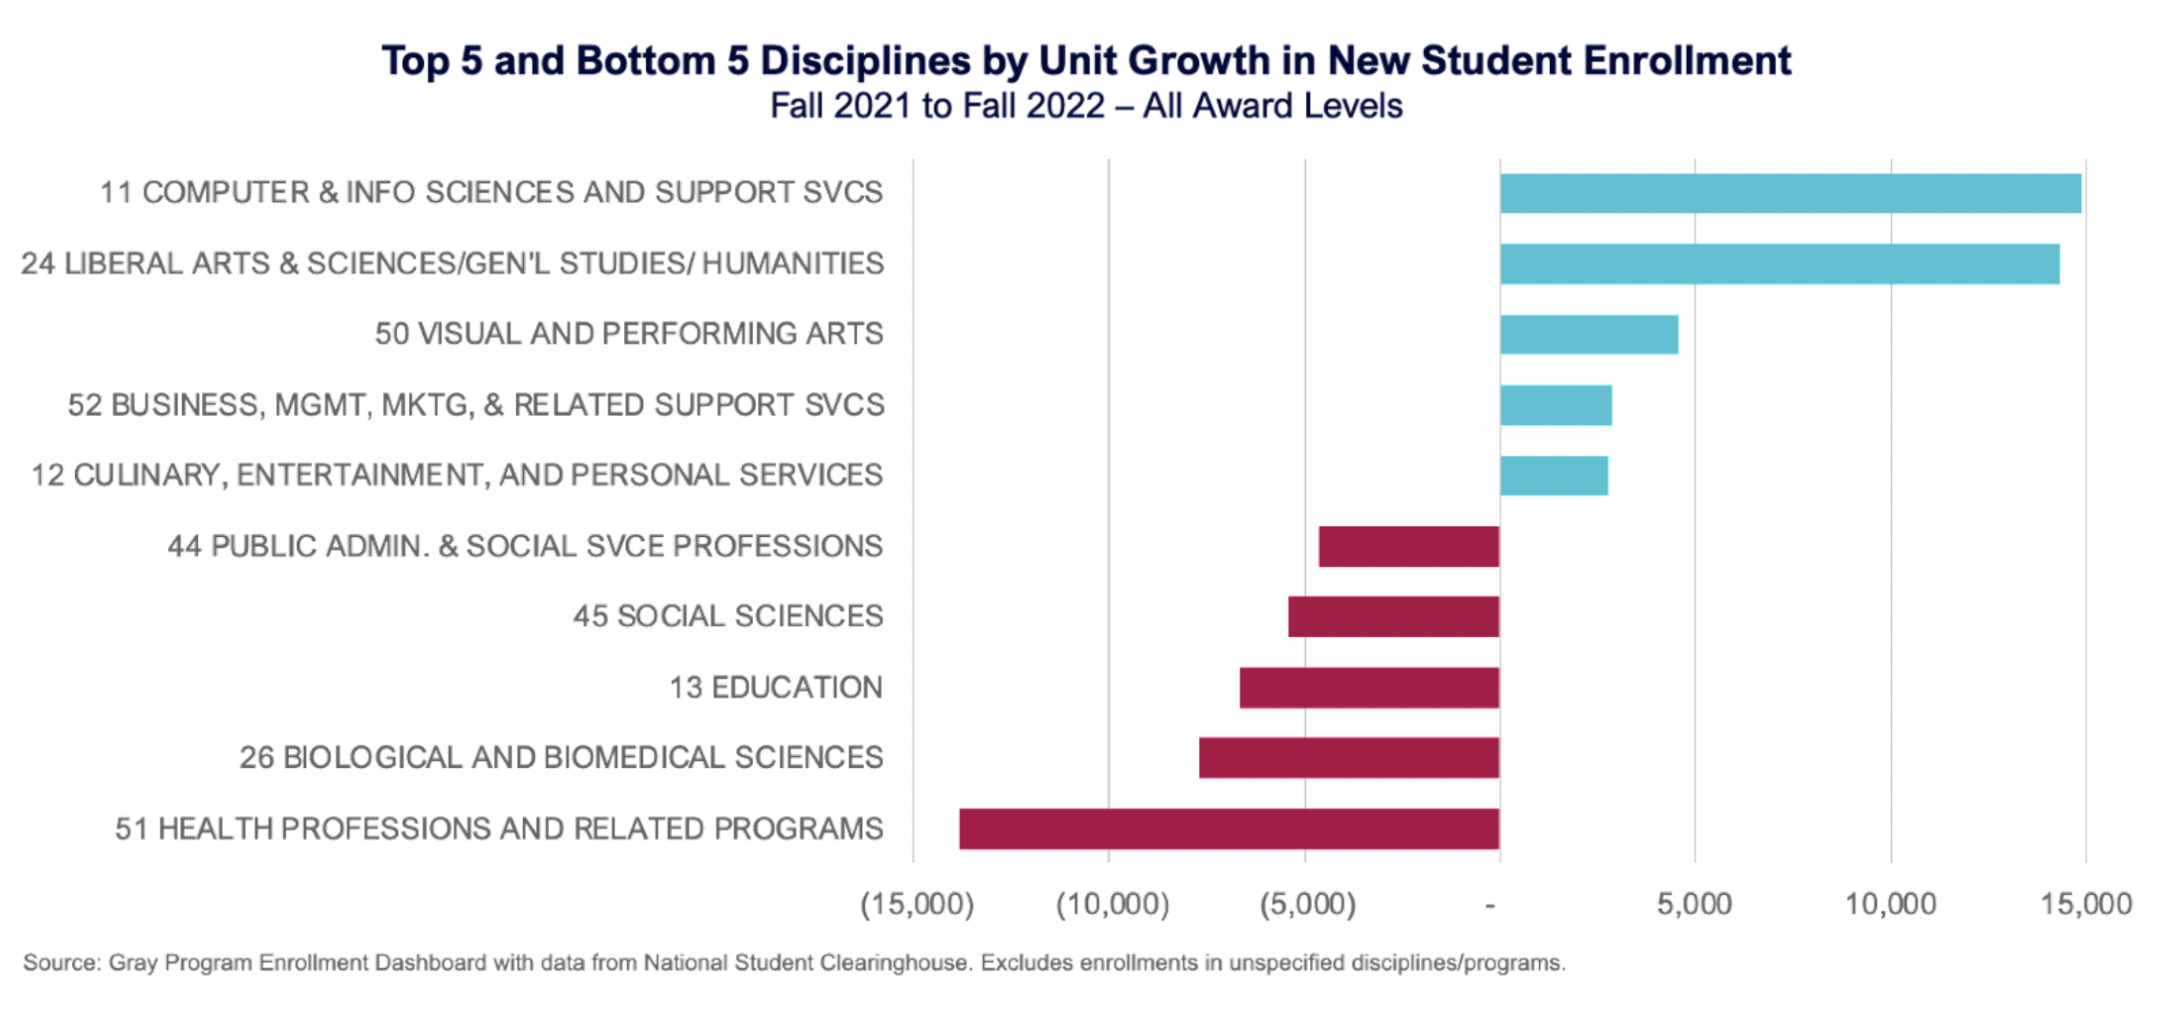 Top 5 and Bottom 5 Disciplines by Unit Growth in New Student Development: Fall 2021 to Fall 2022 - All Award Levels